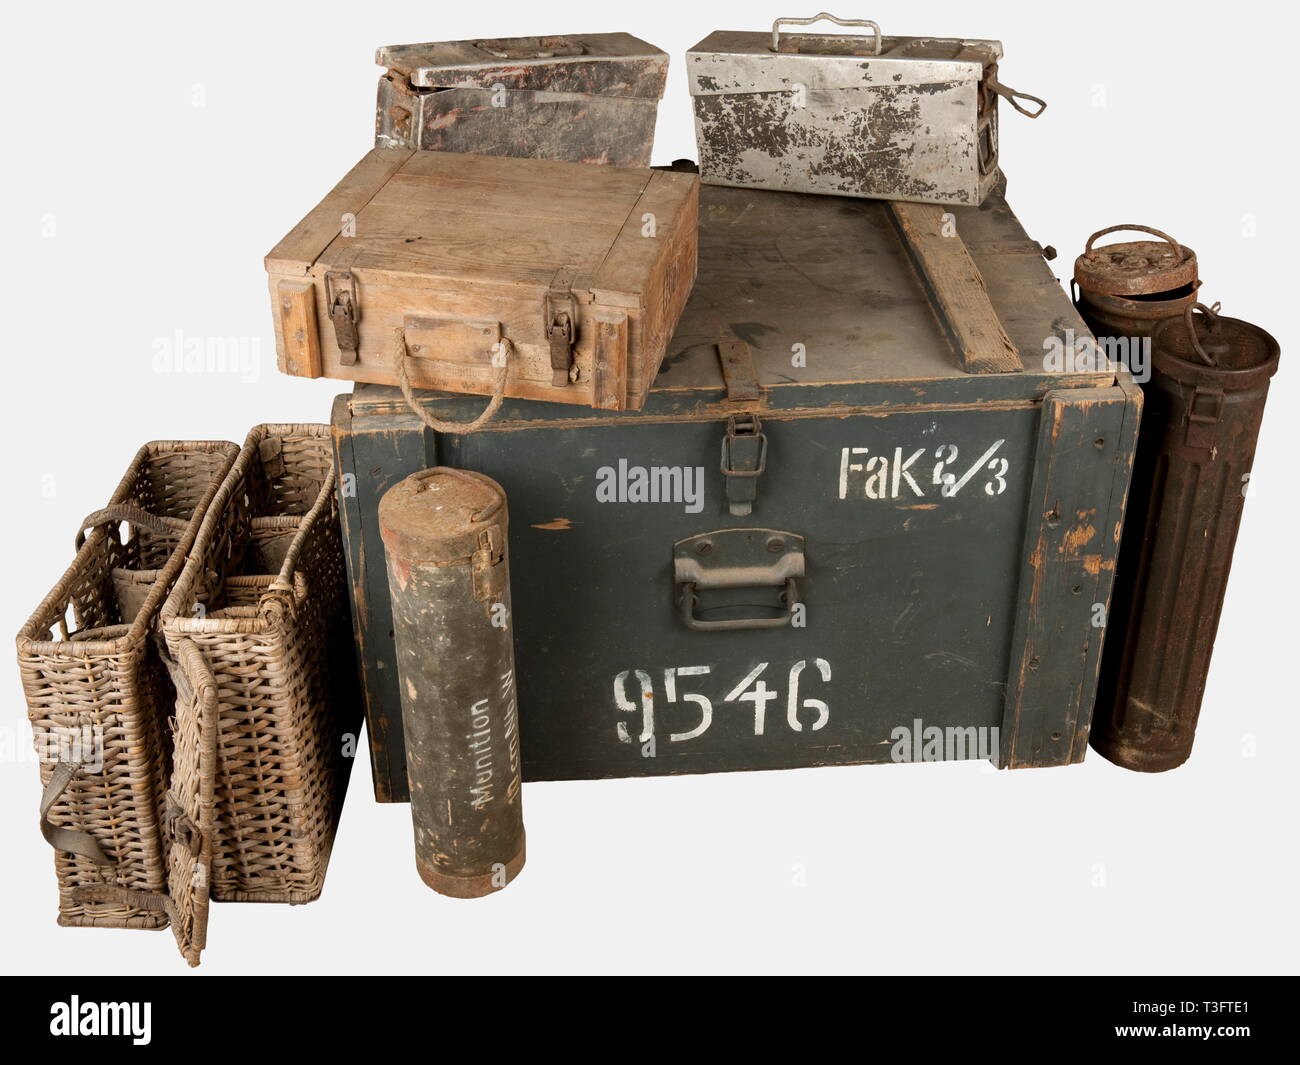 A group of German transport containers, including two rectangular baskets for three 7,7 cm shells (one without its cover, one with a broken strap), a very rare wooden case for two Luftwaffe parachutes painted grey-blue and marked 'Fak 2/3' and '9546', a cylindrical feldgrau painted cardboard canister for 10 cm Nebelwerfer rockets with rusted green painted metallic cover with handle and white marking on the side 'Munition 10cm NBW', a rectangular wood case for ammunitions with cord handle and remains of a beige tab, and two aluminium MG 34/42 belt canisters with remains of t, Editorial-Use-Only Stock Photo